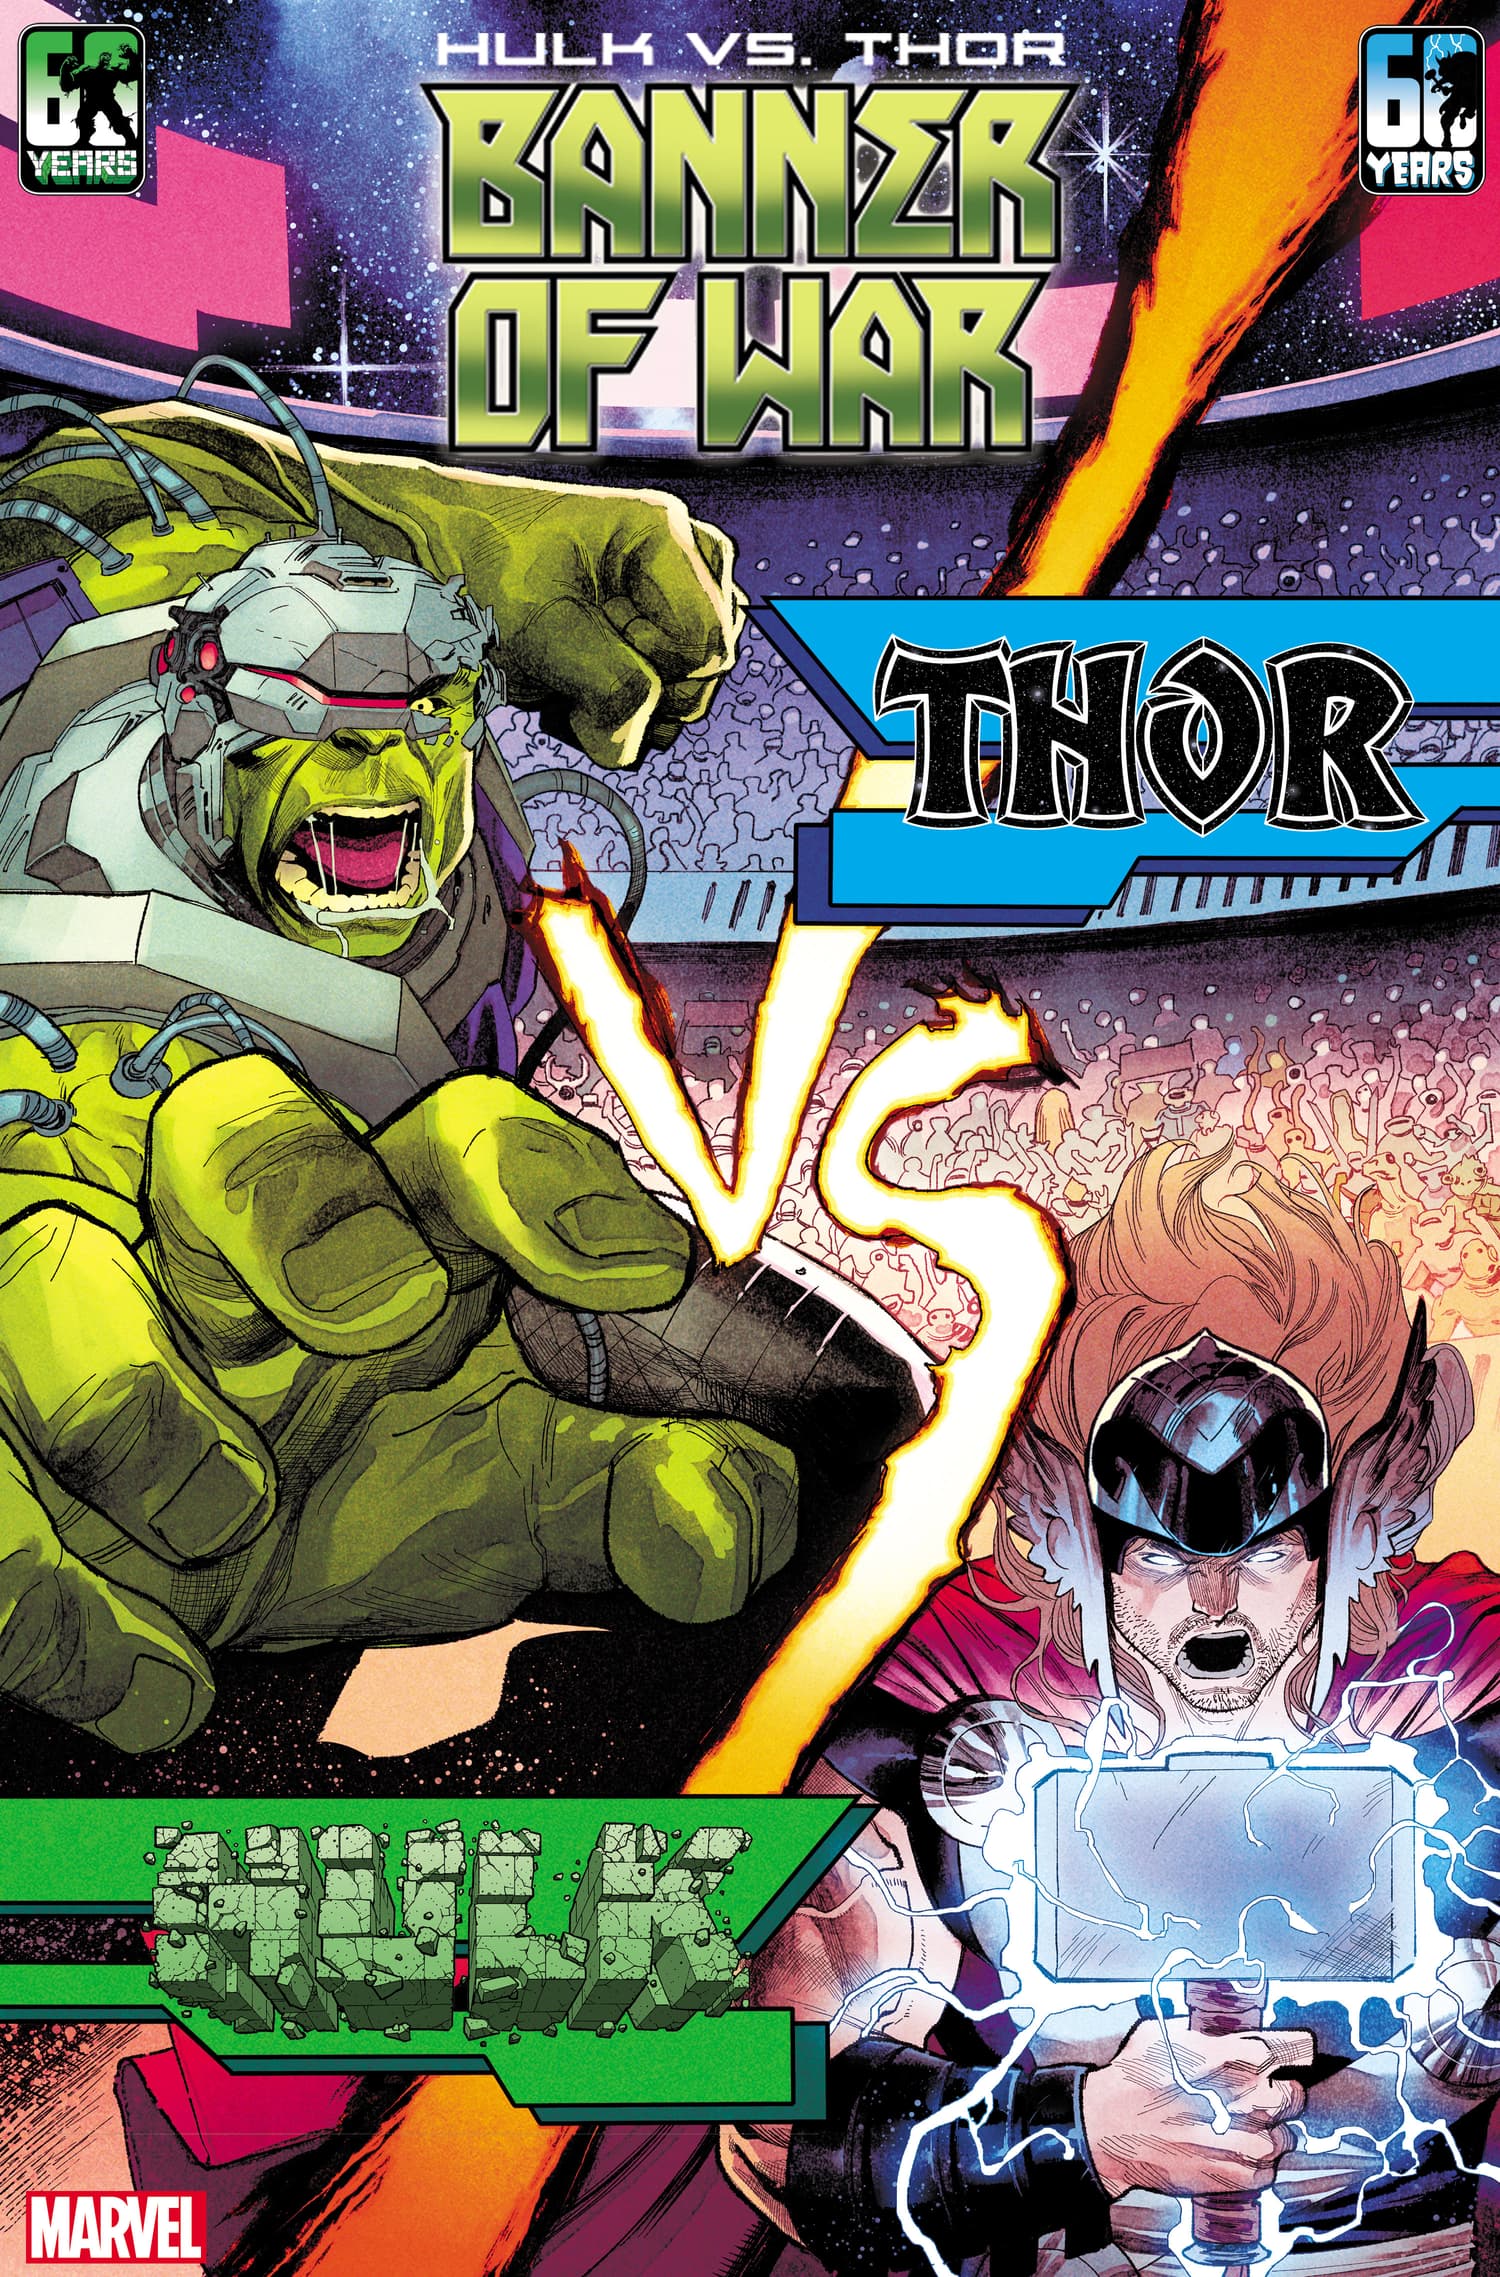 HULK VS. THOR: BANNER OF WAR ALPHA #1 Variant Cover by MARTIN COCCOLO